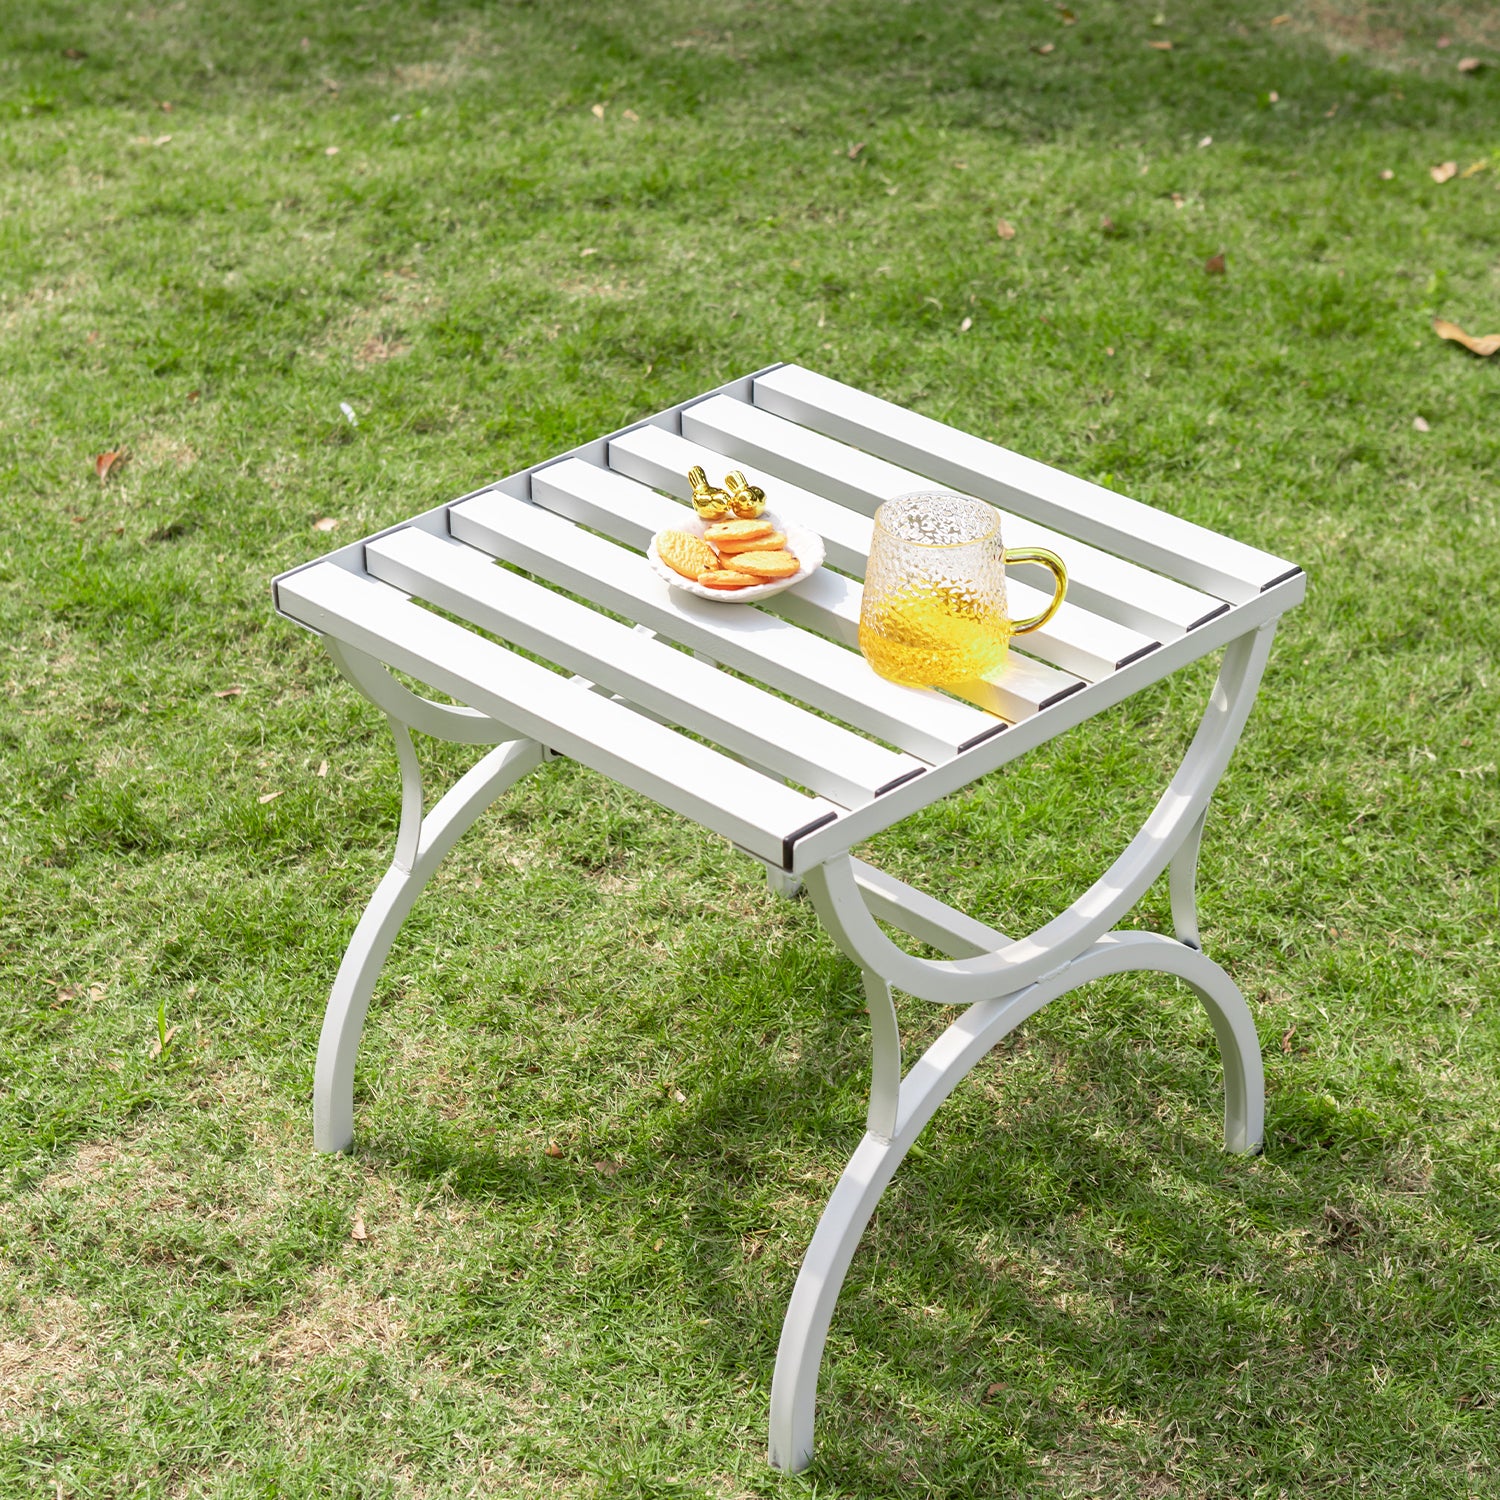 Sophia & William Metal Outdoor Side Table Slatted Top Design - White - image 1 of 4